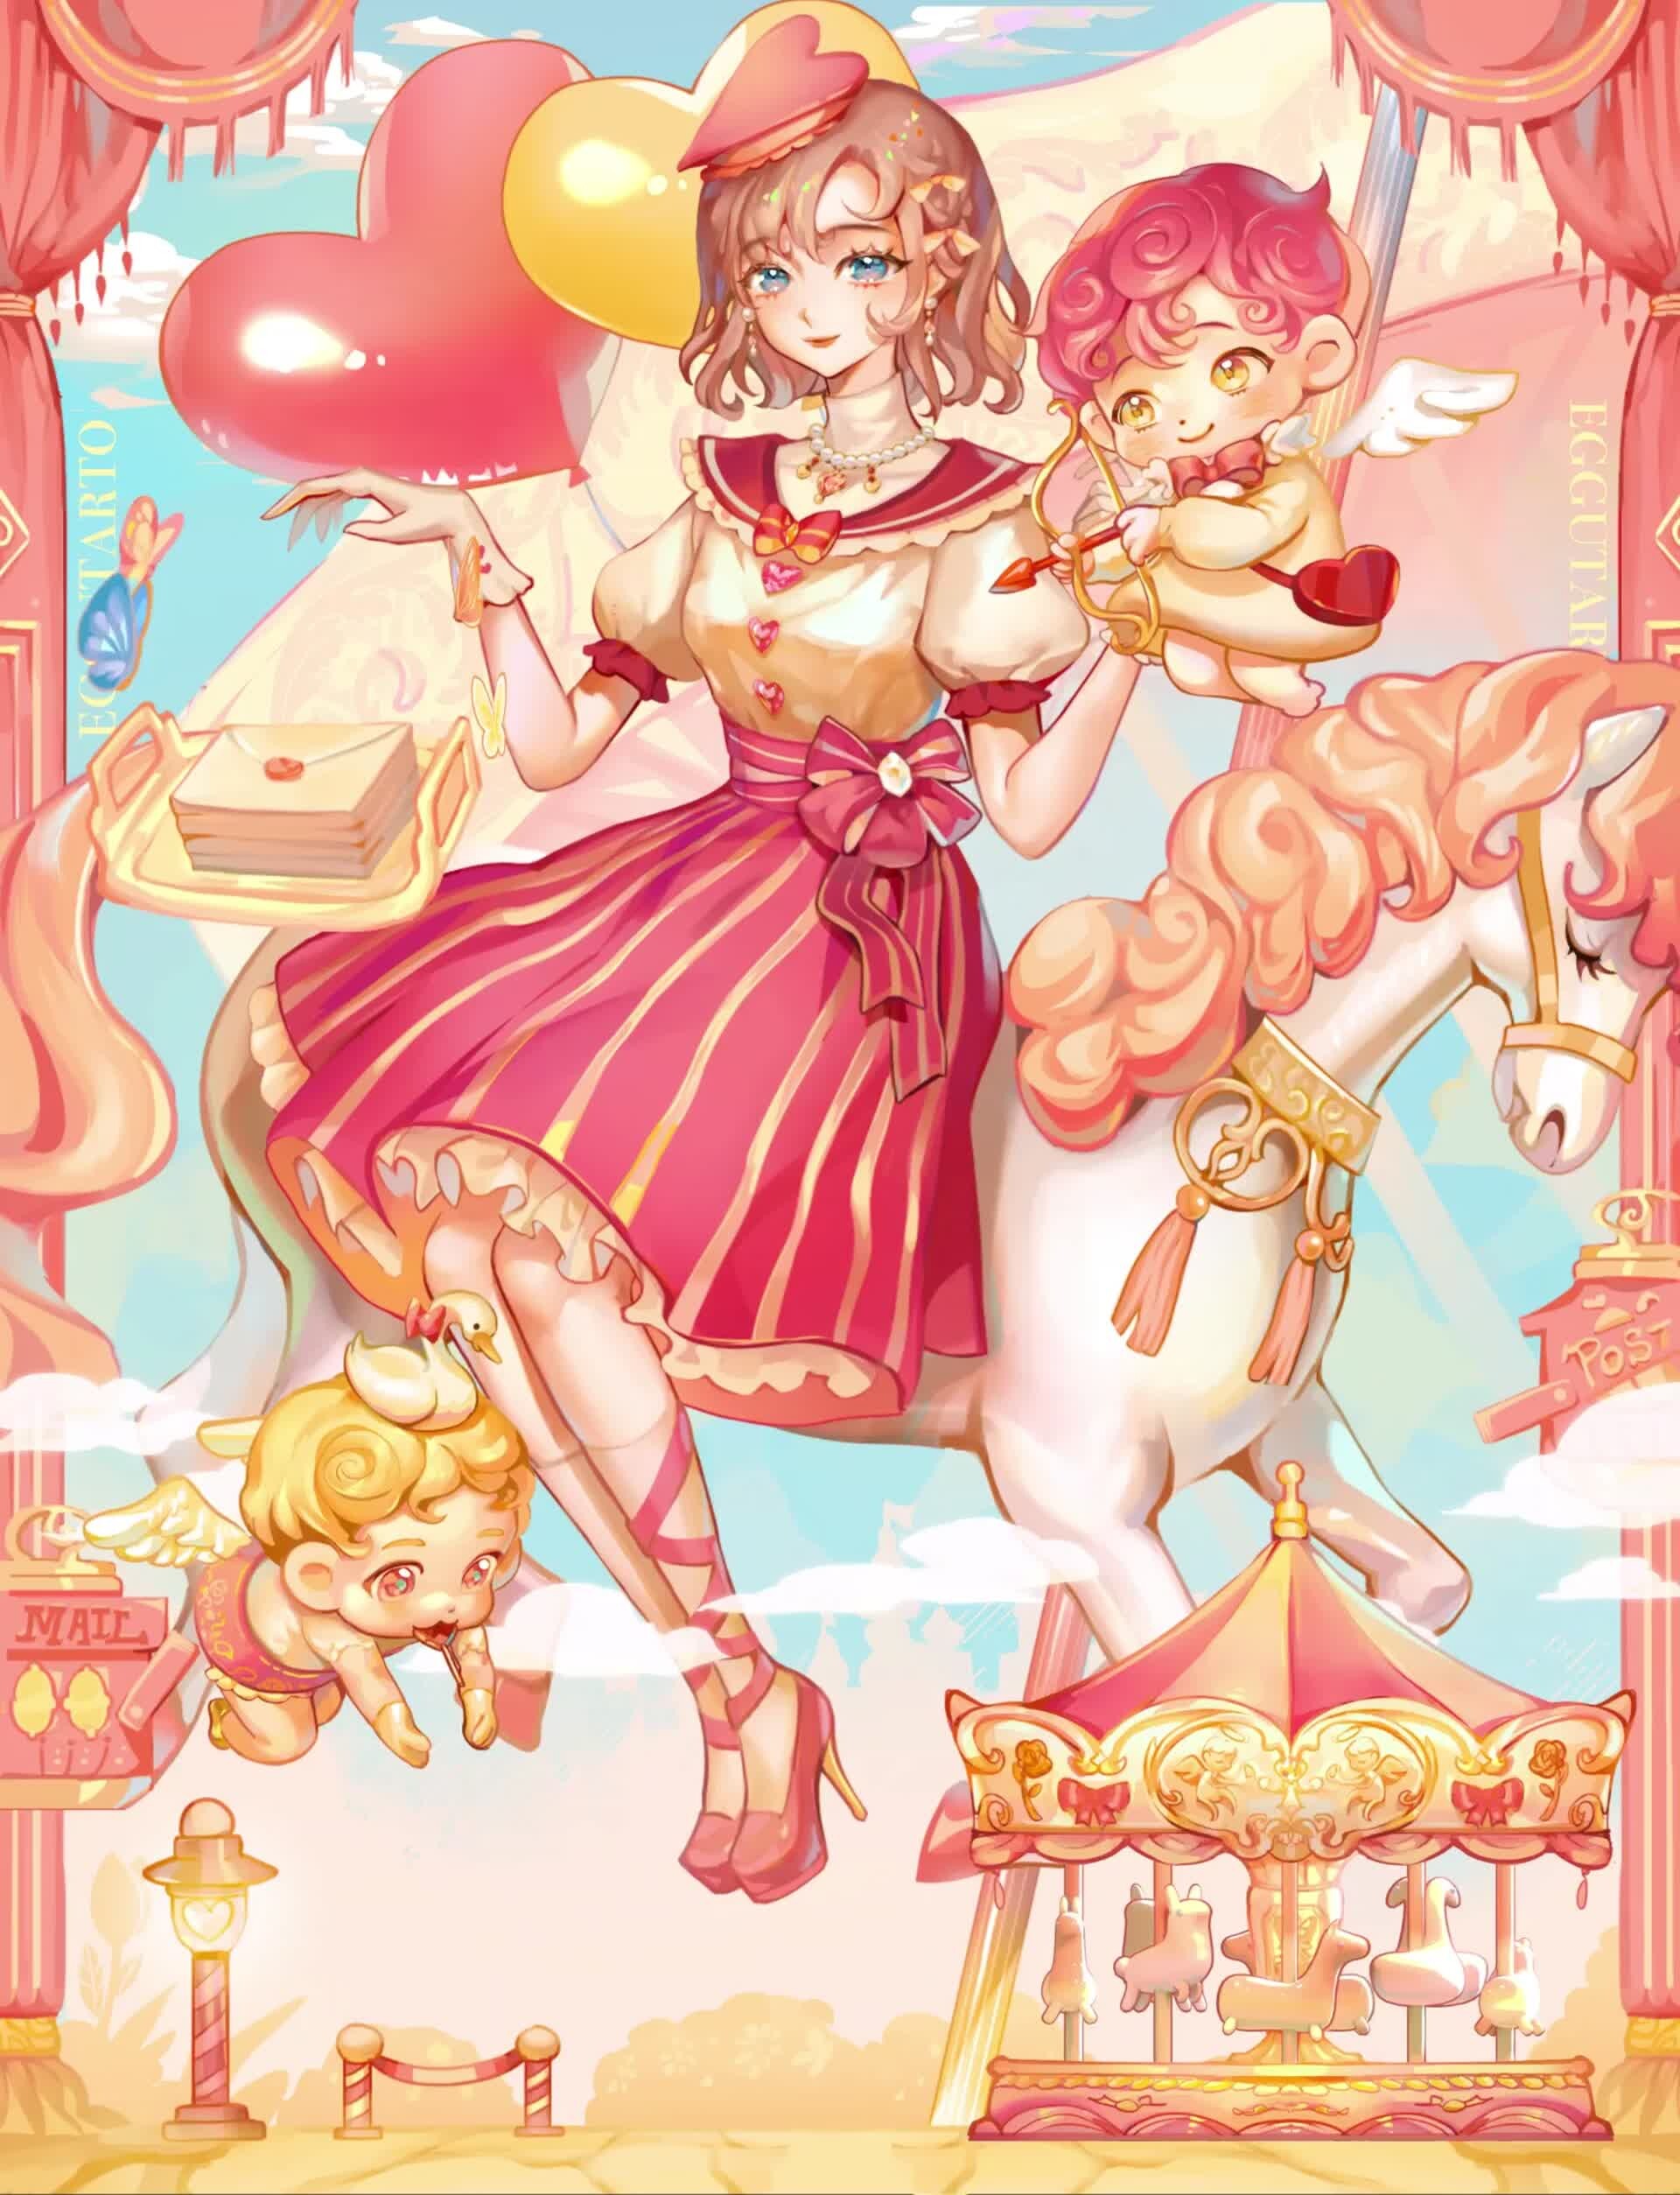 Cute anime girl in candy land